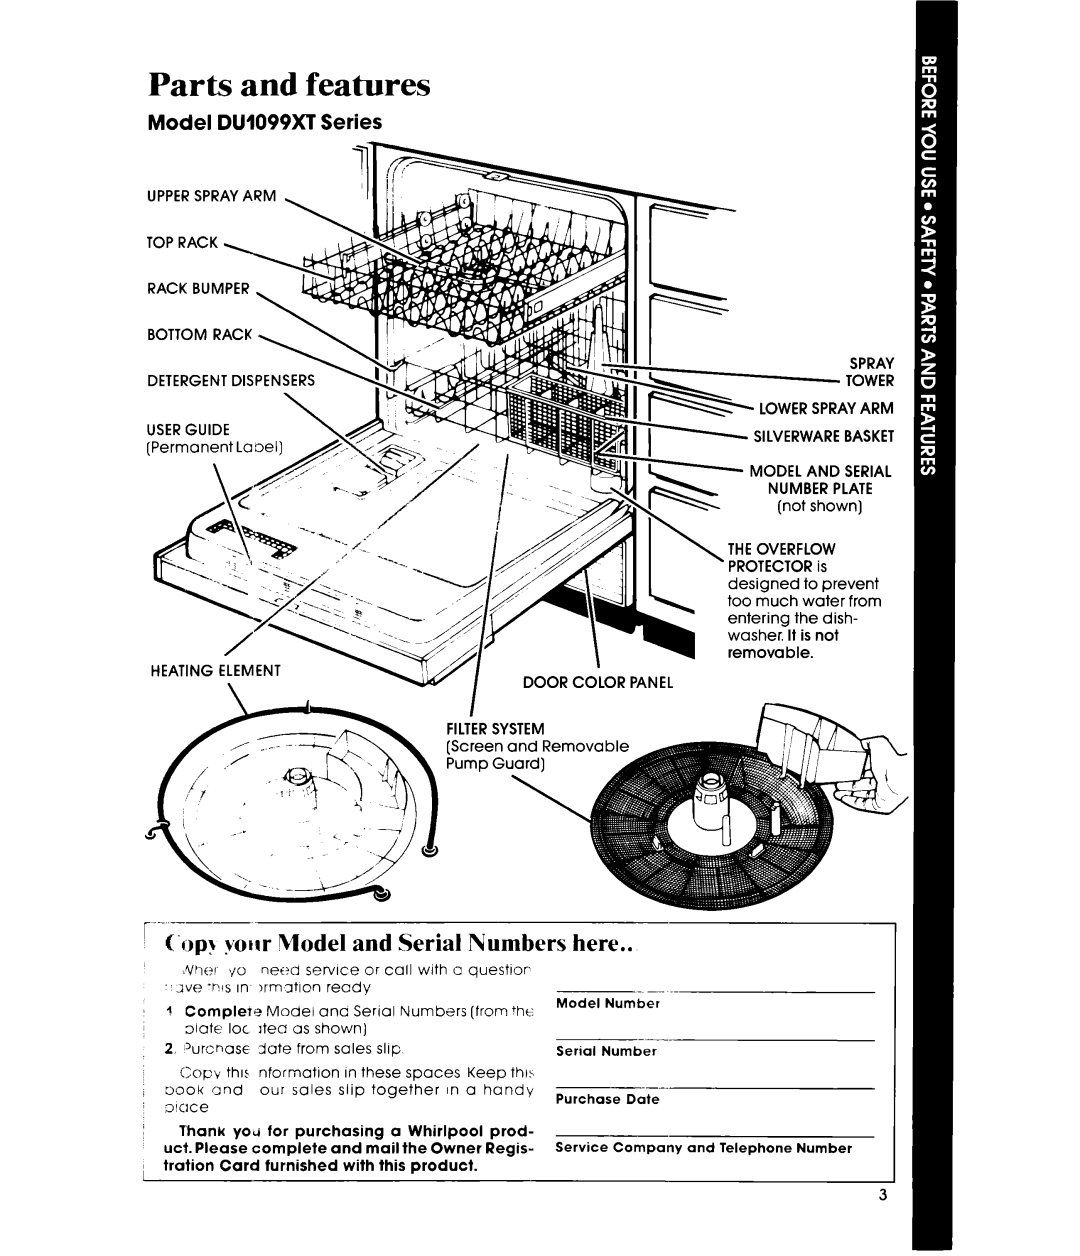 Whirlpool manual Parts and features, ~ 6 .““’, C’c p\. vow1 Model and Serial Numbers here, Model DU1099XT Series, cll 